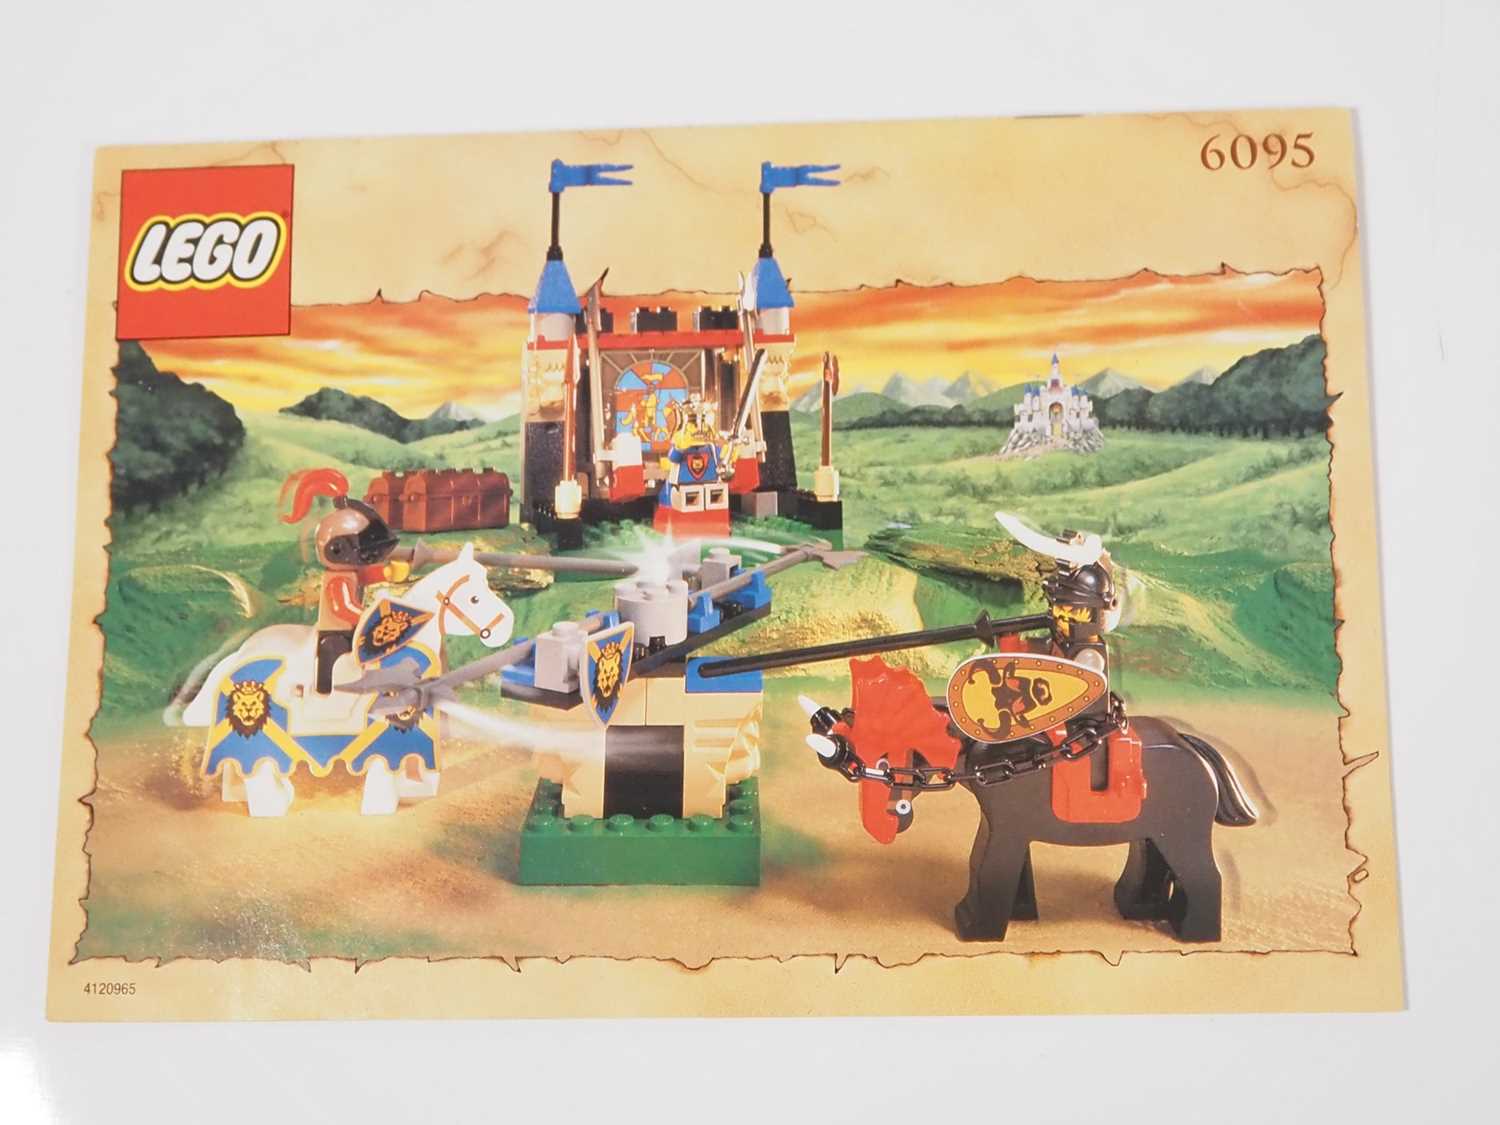 LEGO - CASTLE #6095 Knights Kingdom 1 - Royal Joust - complete with instructions, no box together - Image 4 of 4